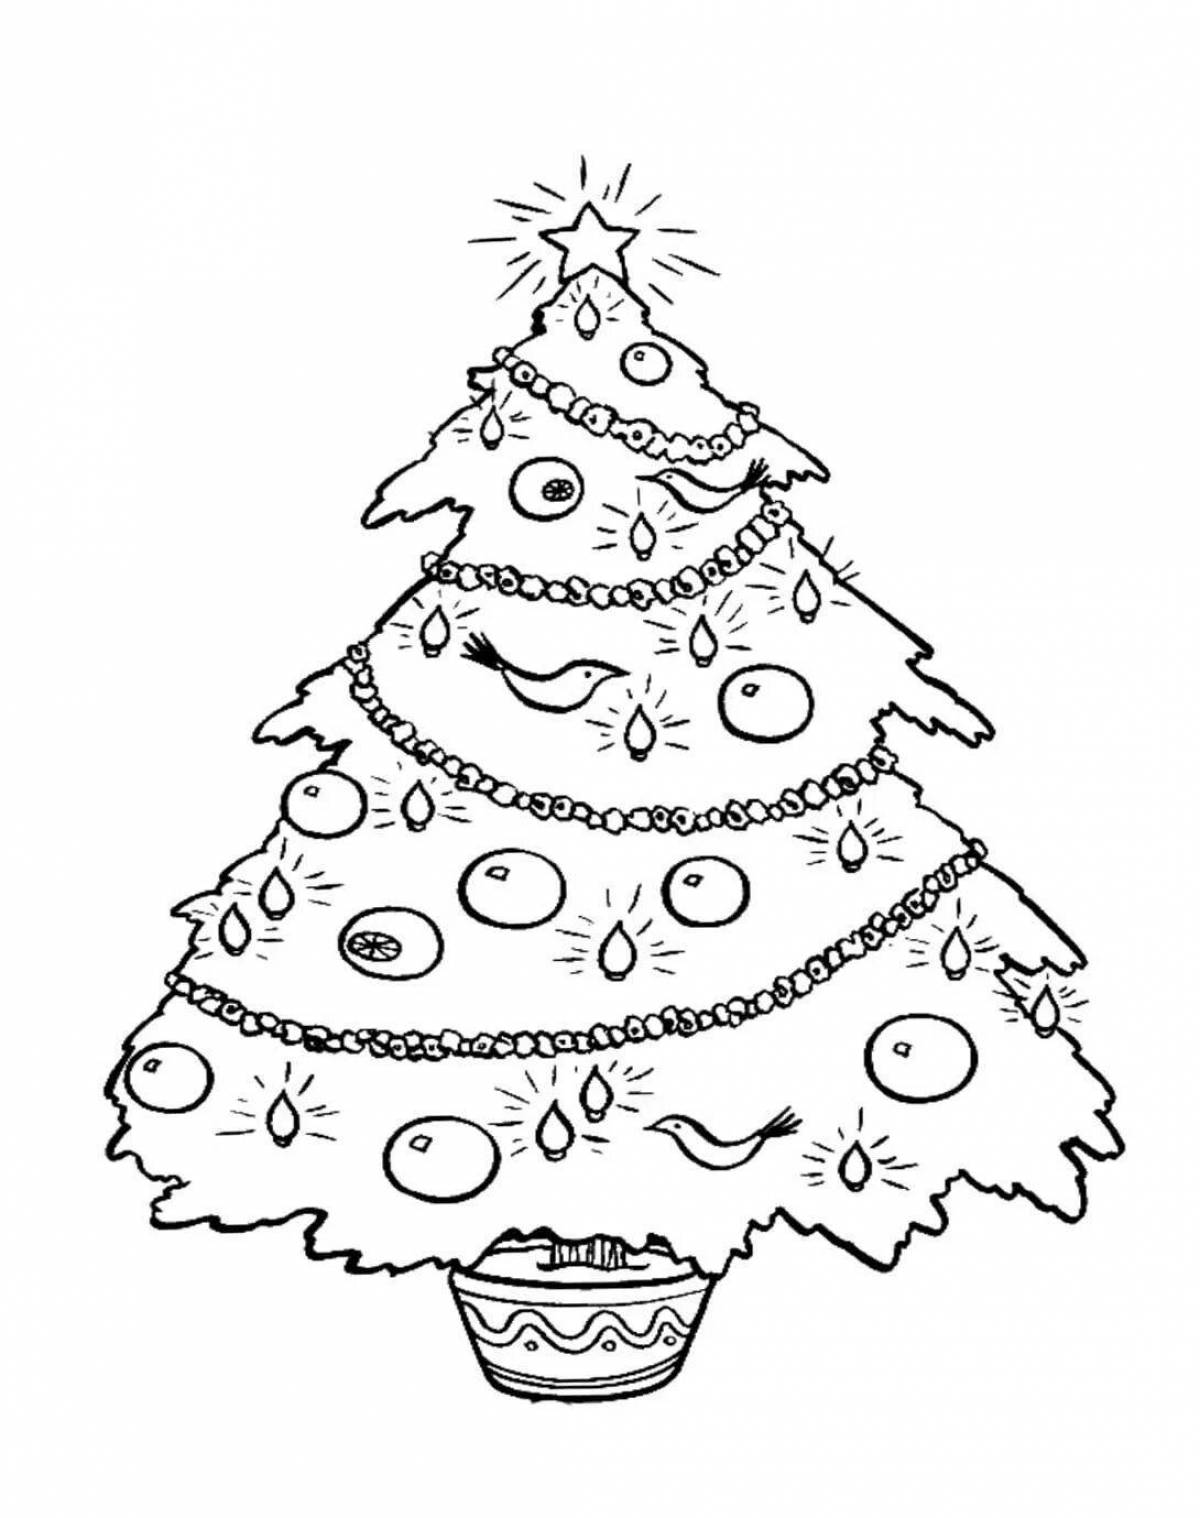 Coloring page with ornate Christmas tree